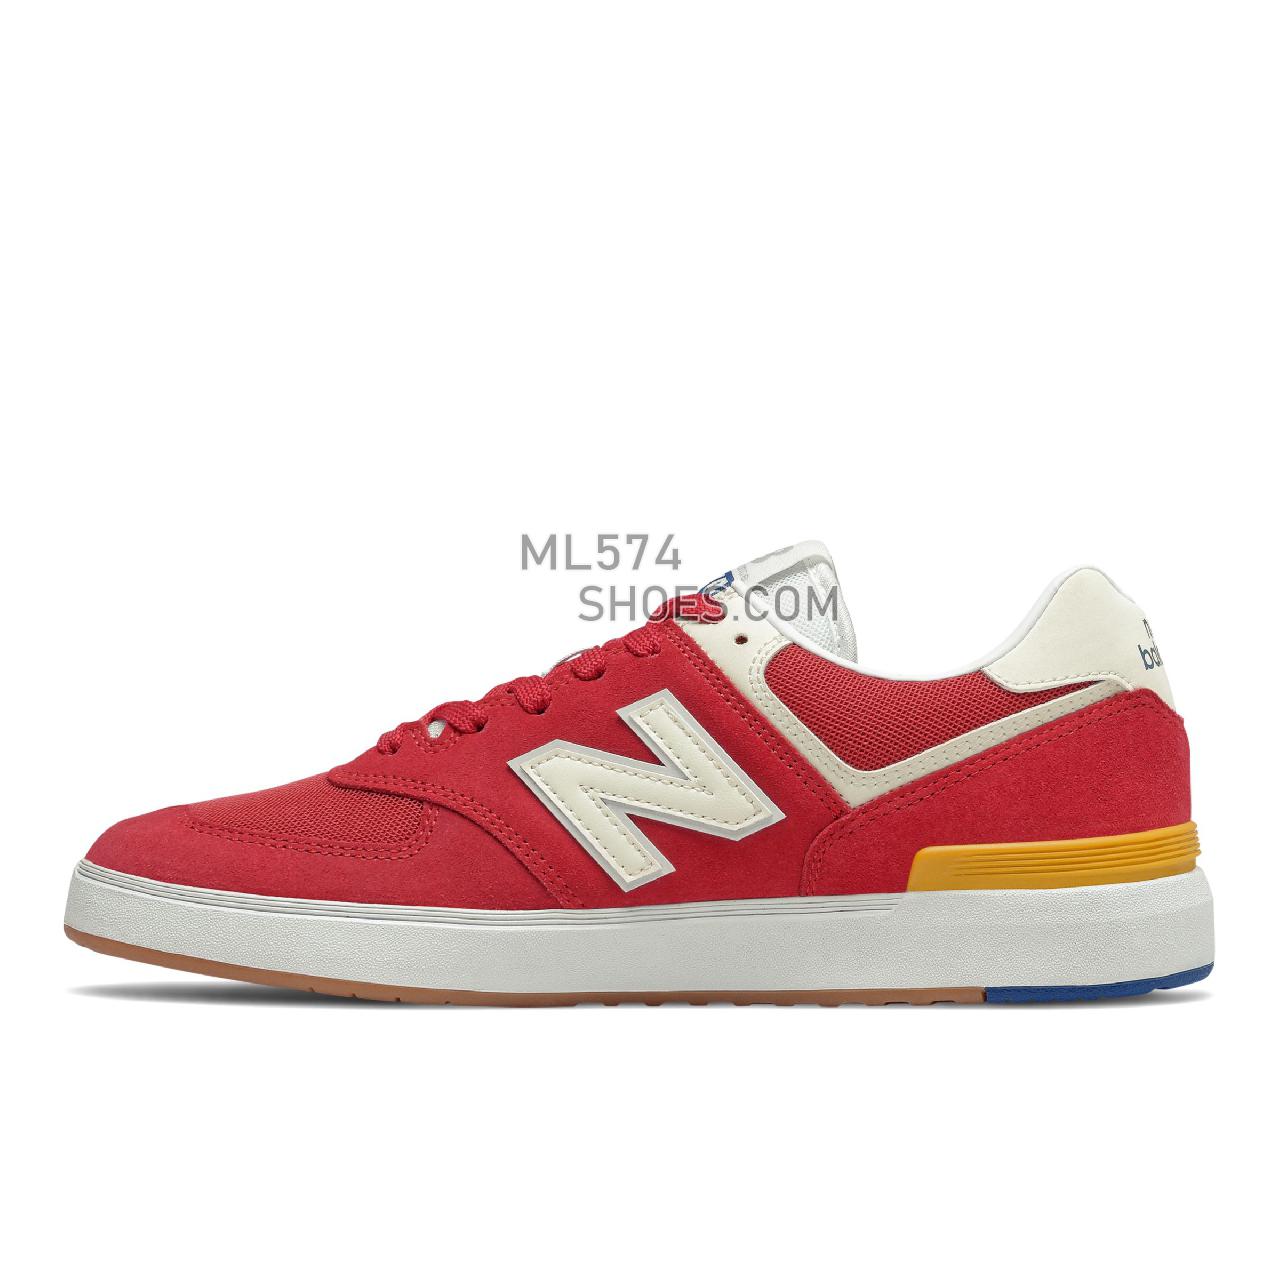 New Balance All Coasts AM574 - Men's Court Classics - Red with White - AM574RWY